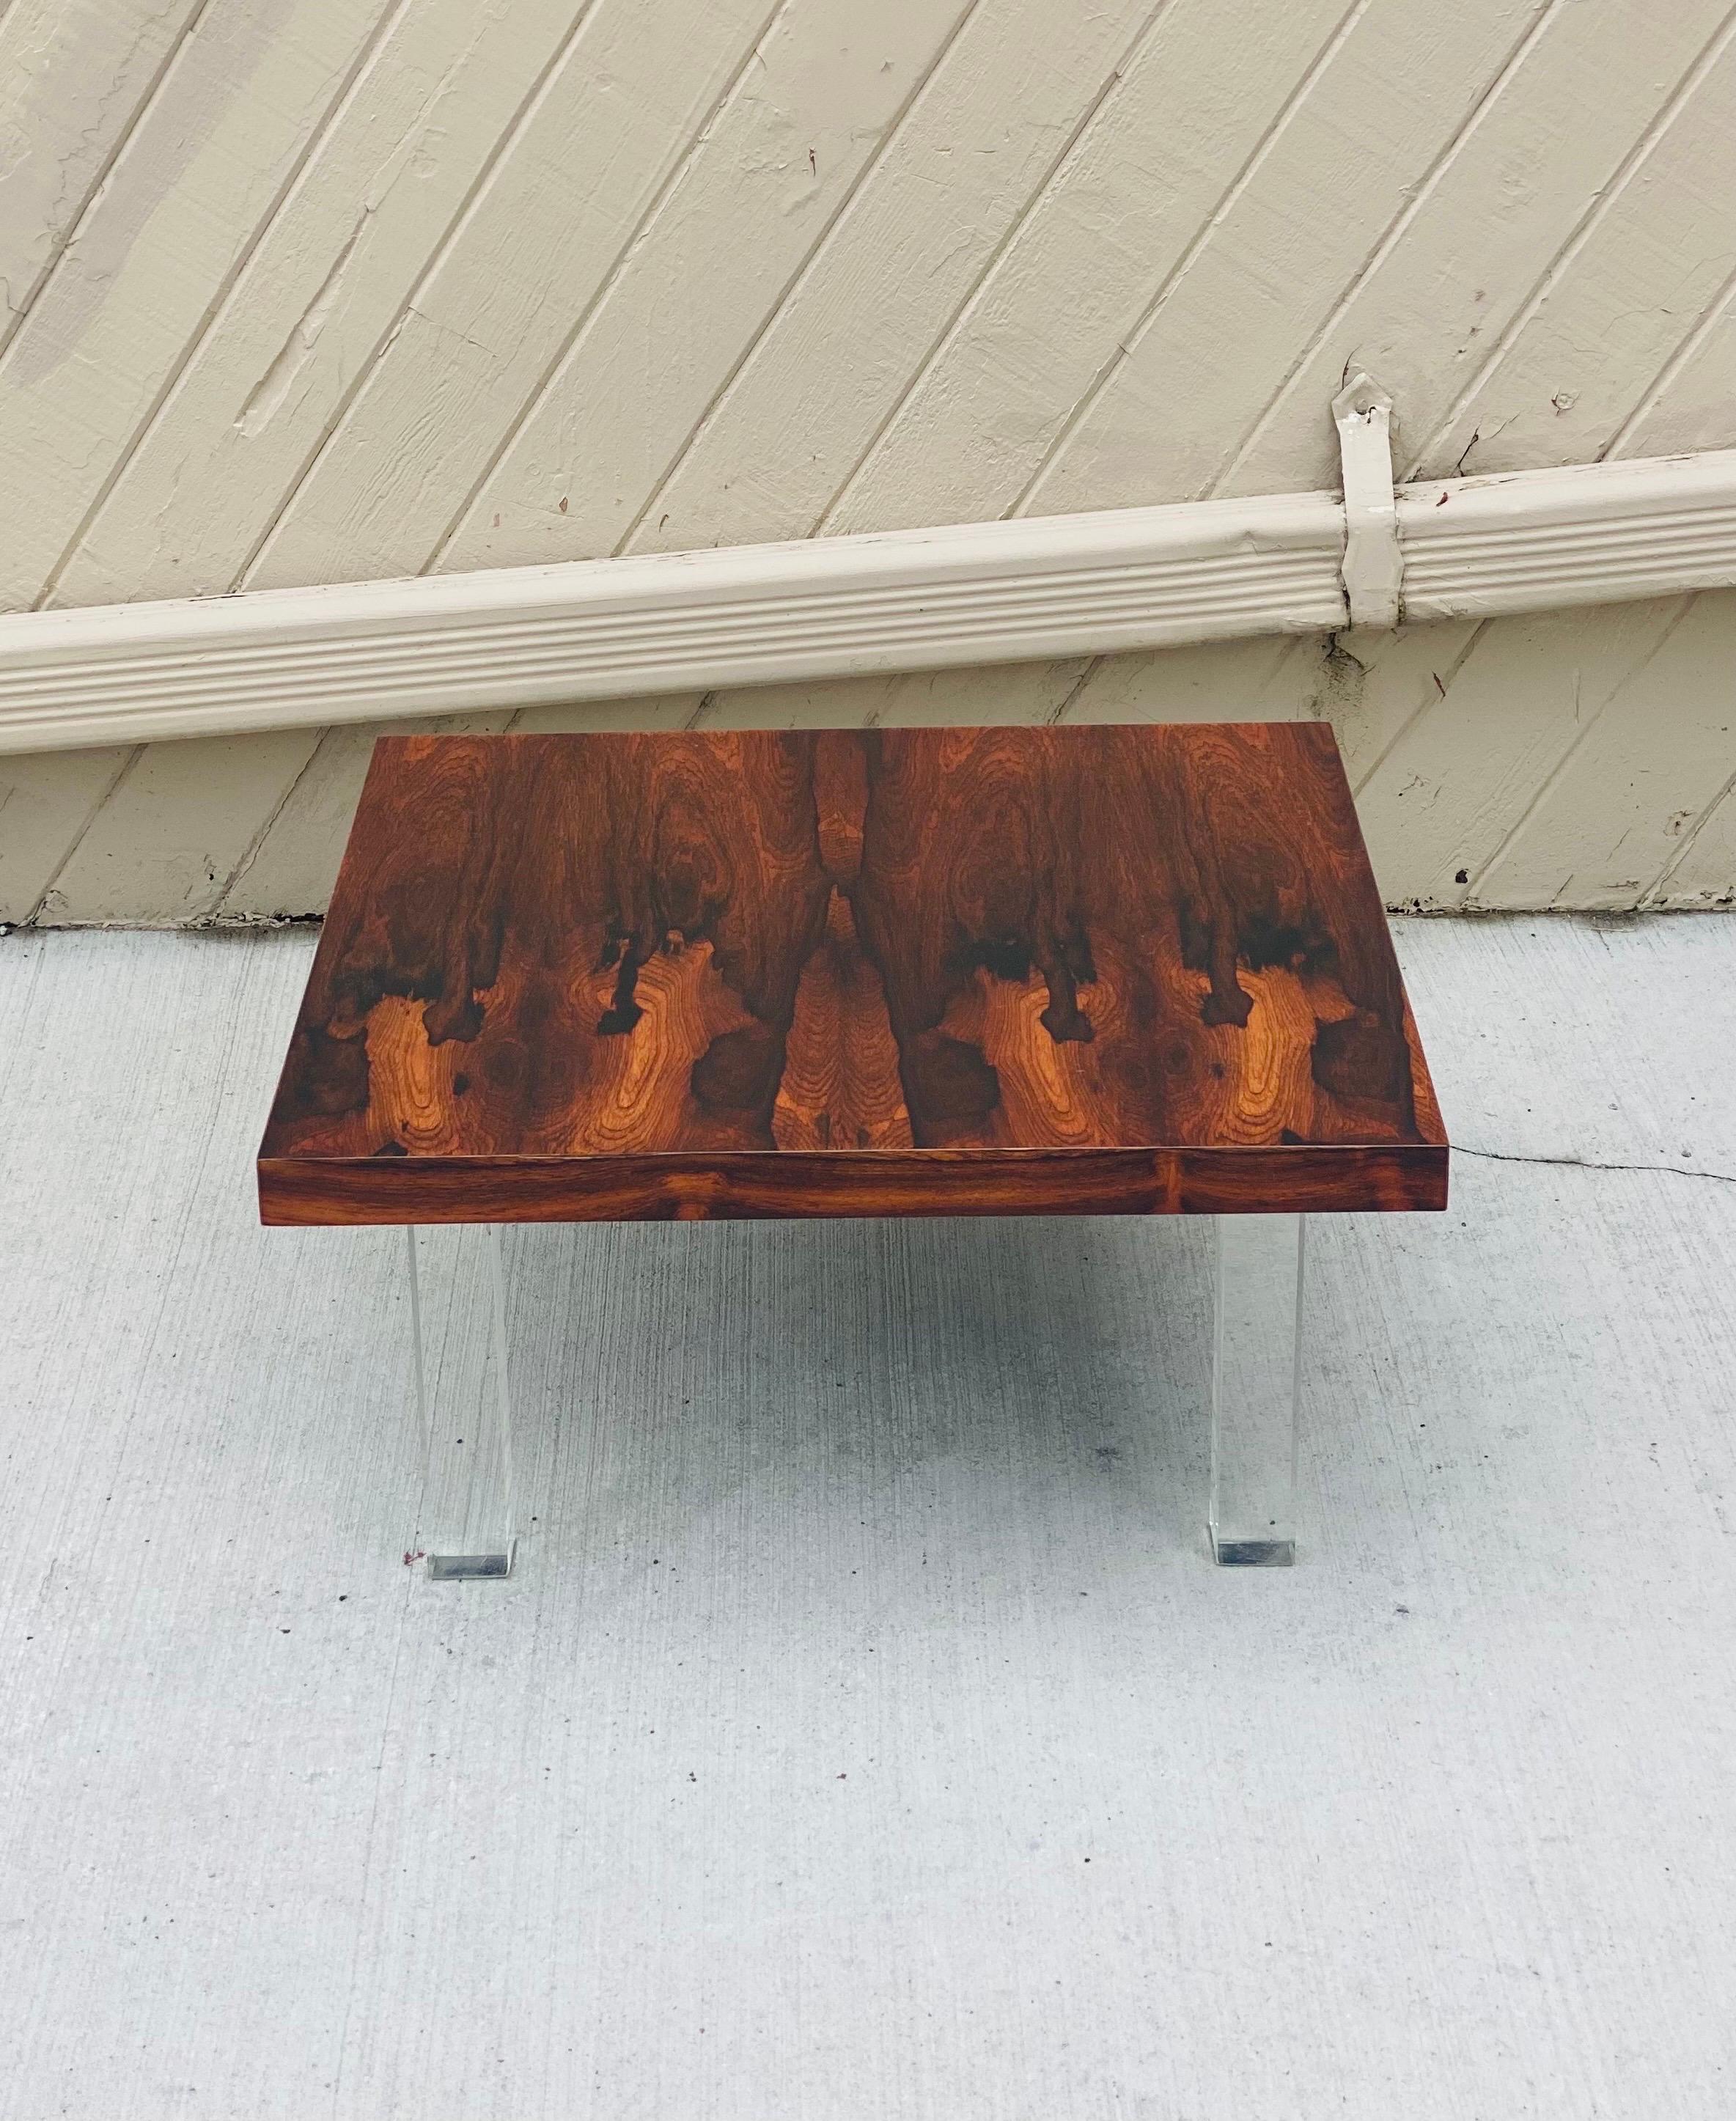 We are very pleased to offer a modern coffee table by American designer Milo Baughman for Thayer Coggin, circa the 1970. Thayer Coggin is a staple for luxury home furnishings and the exclusive maker of Milo Baughman's pioneering midcentury modern